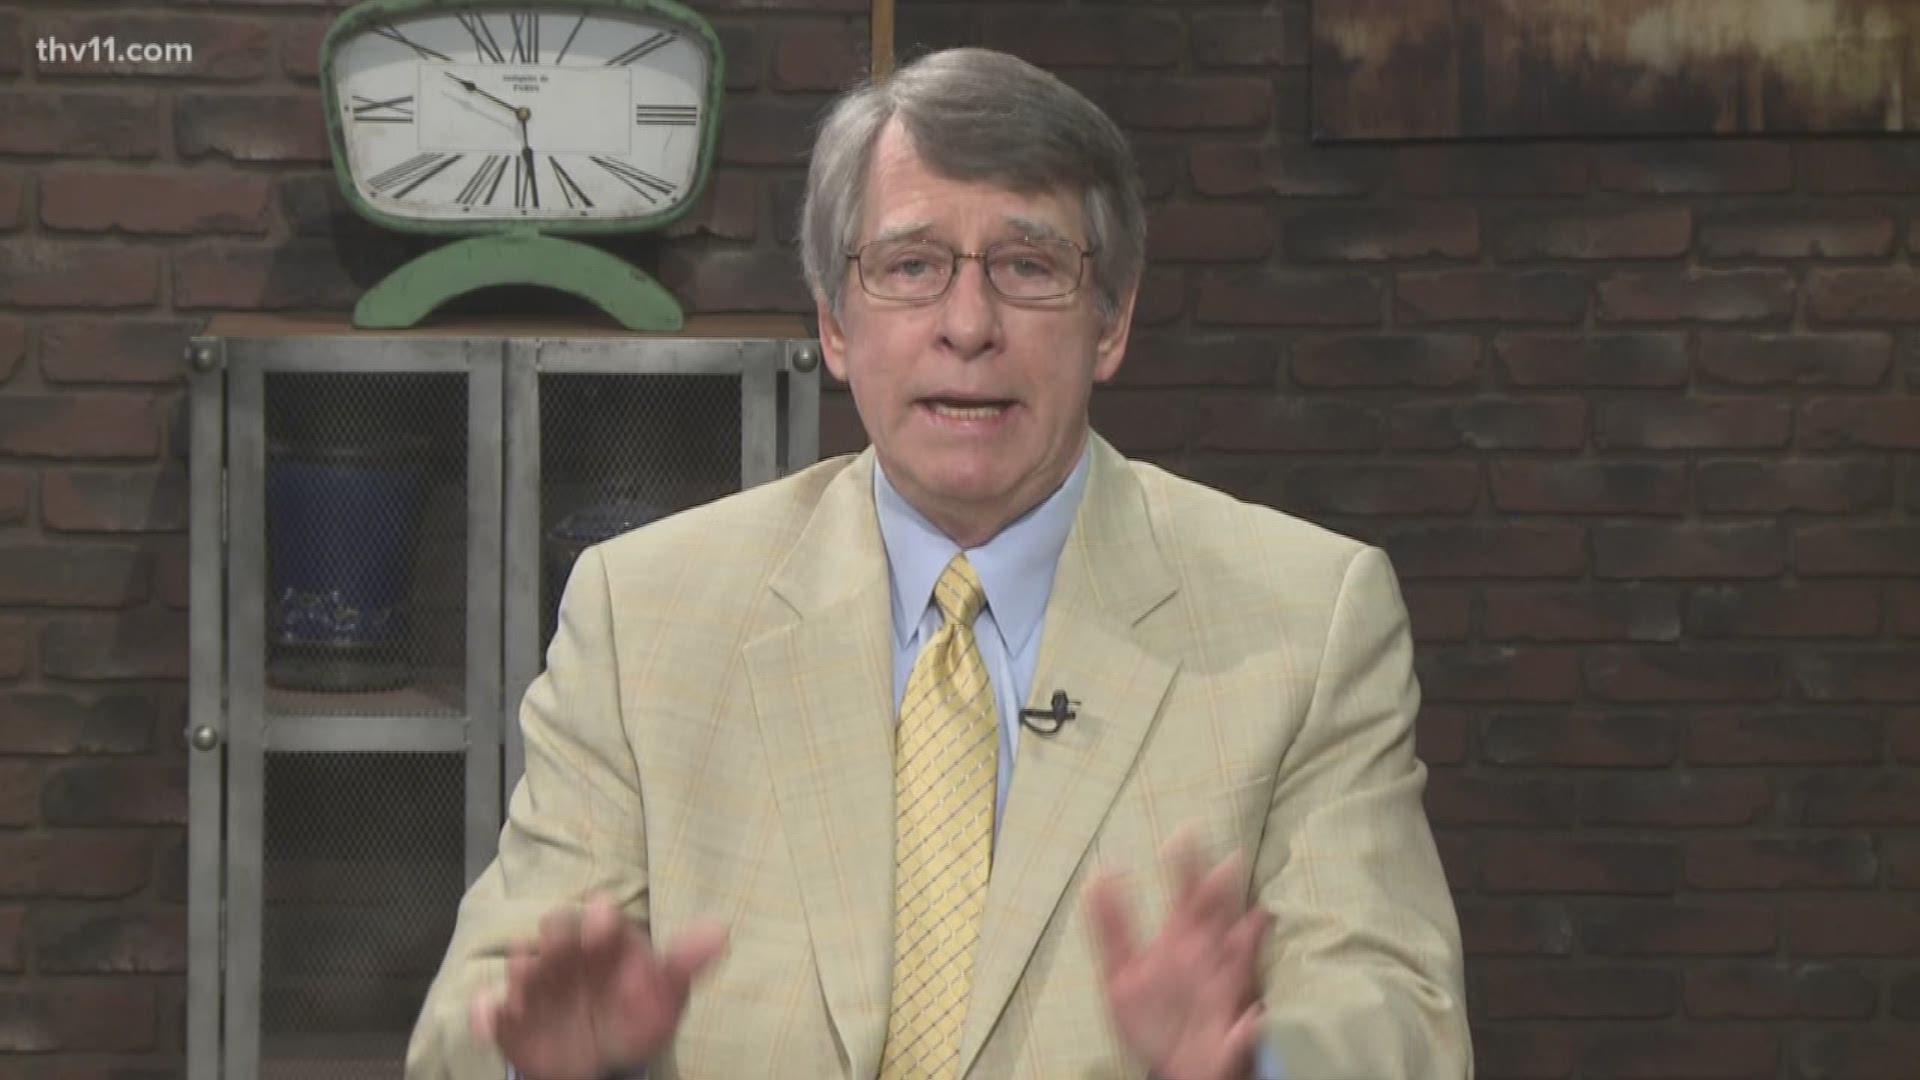 Dr. Pait answers viewer questions, including one about e-cigarettes.